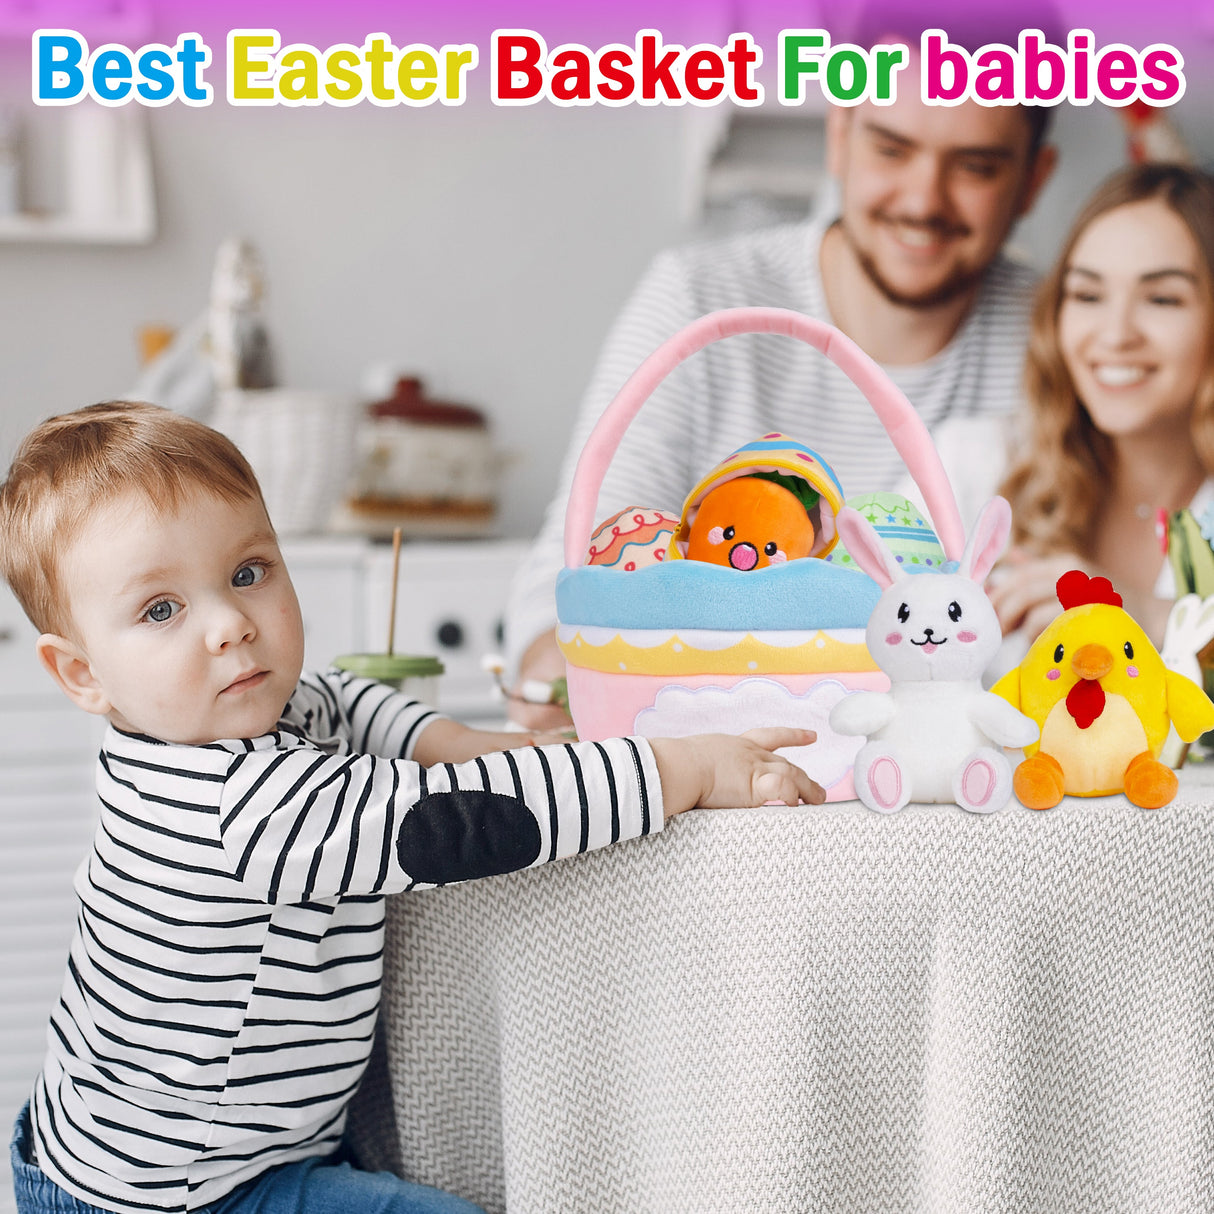 LUBOT Toy Set Bunny Easter Basket for Kids - GexWorldwide